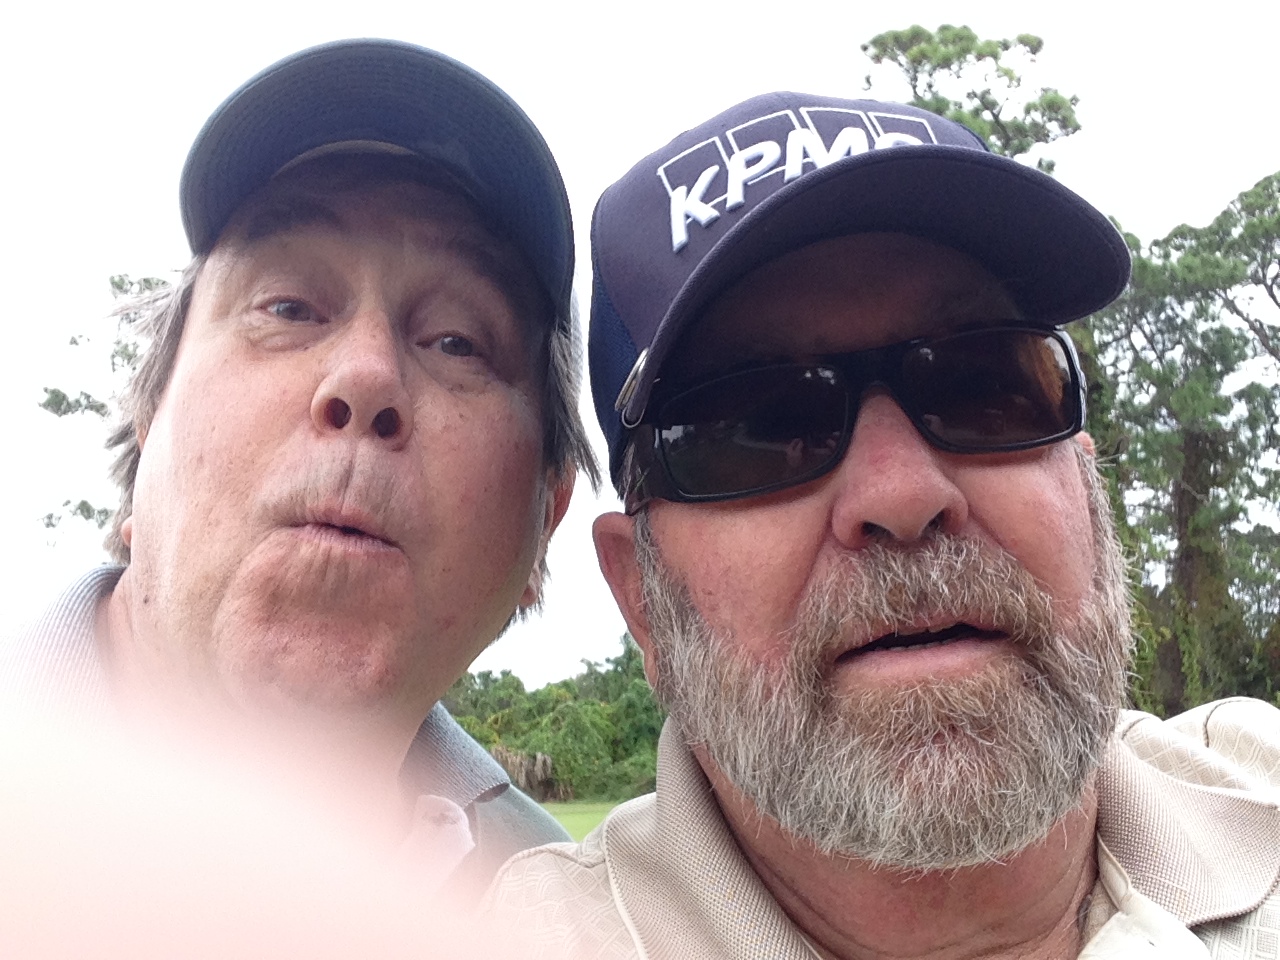 Tommy THRILLED for me shooting “another ?” Birdie. Bought me a clicker to hang on my belt! Rest In Peace Buddy.